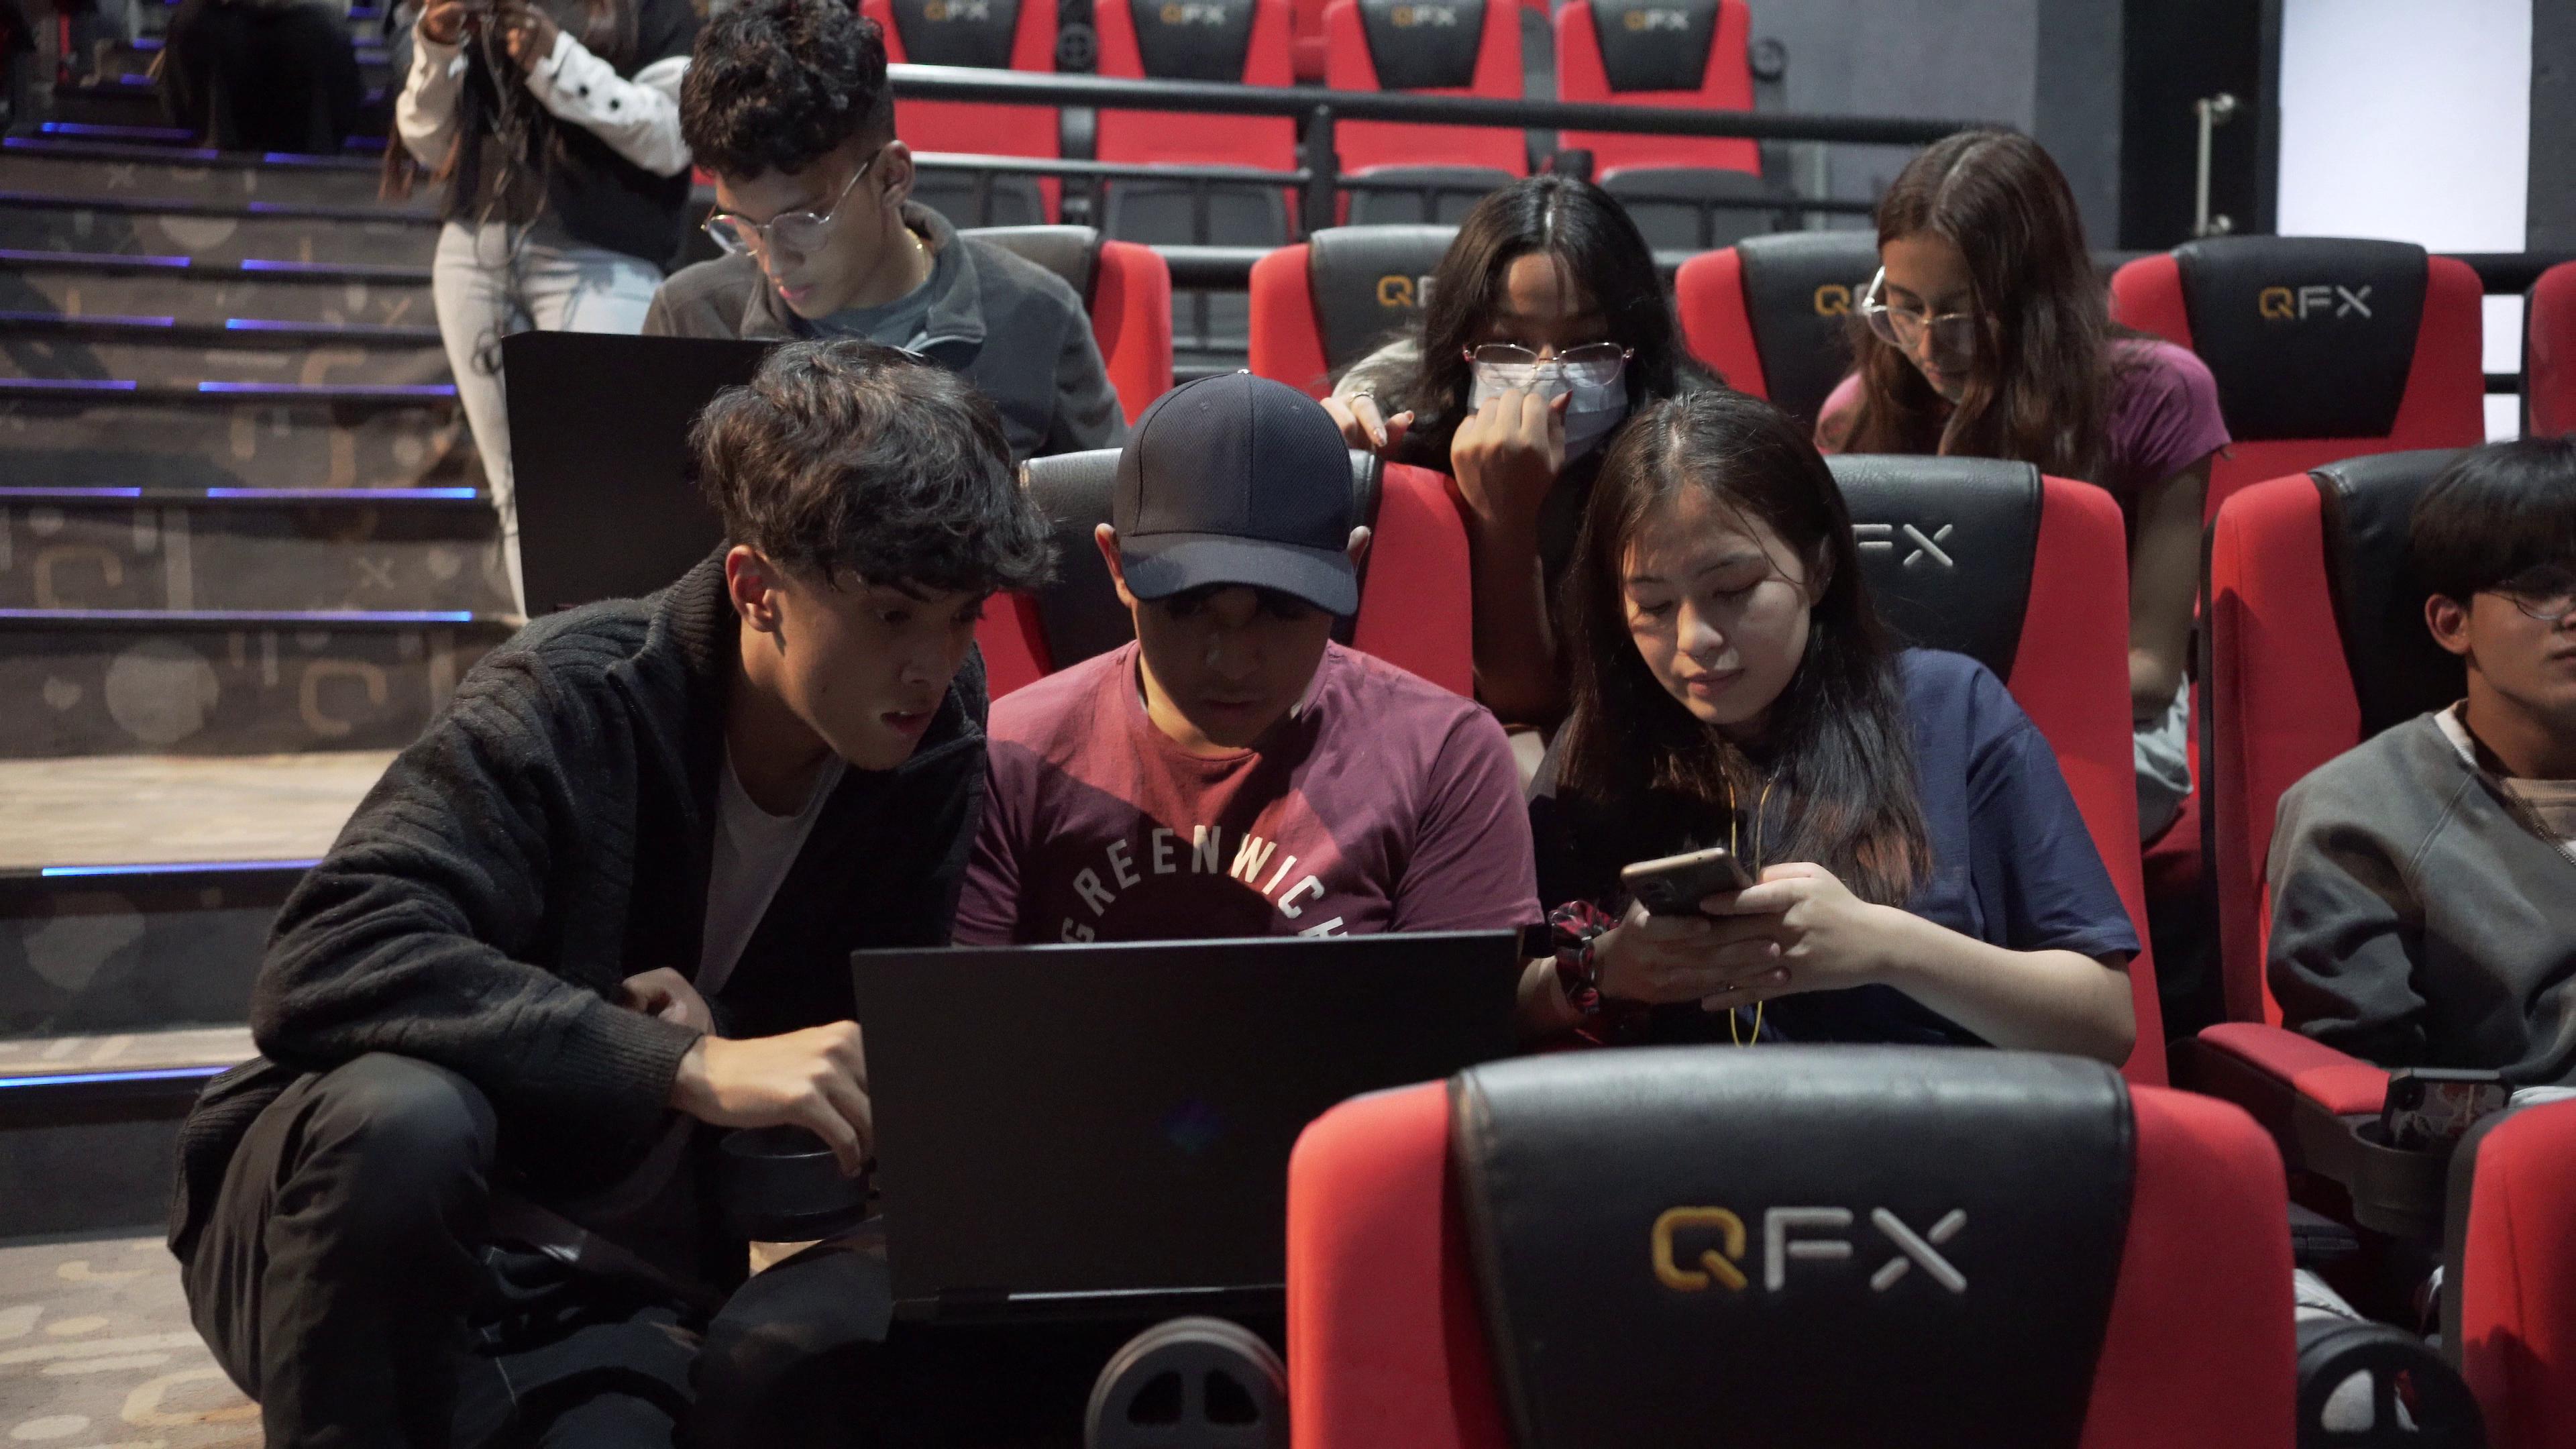 Students Competing on Guardian of Cyberspace Event